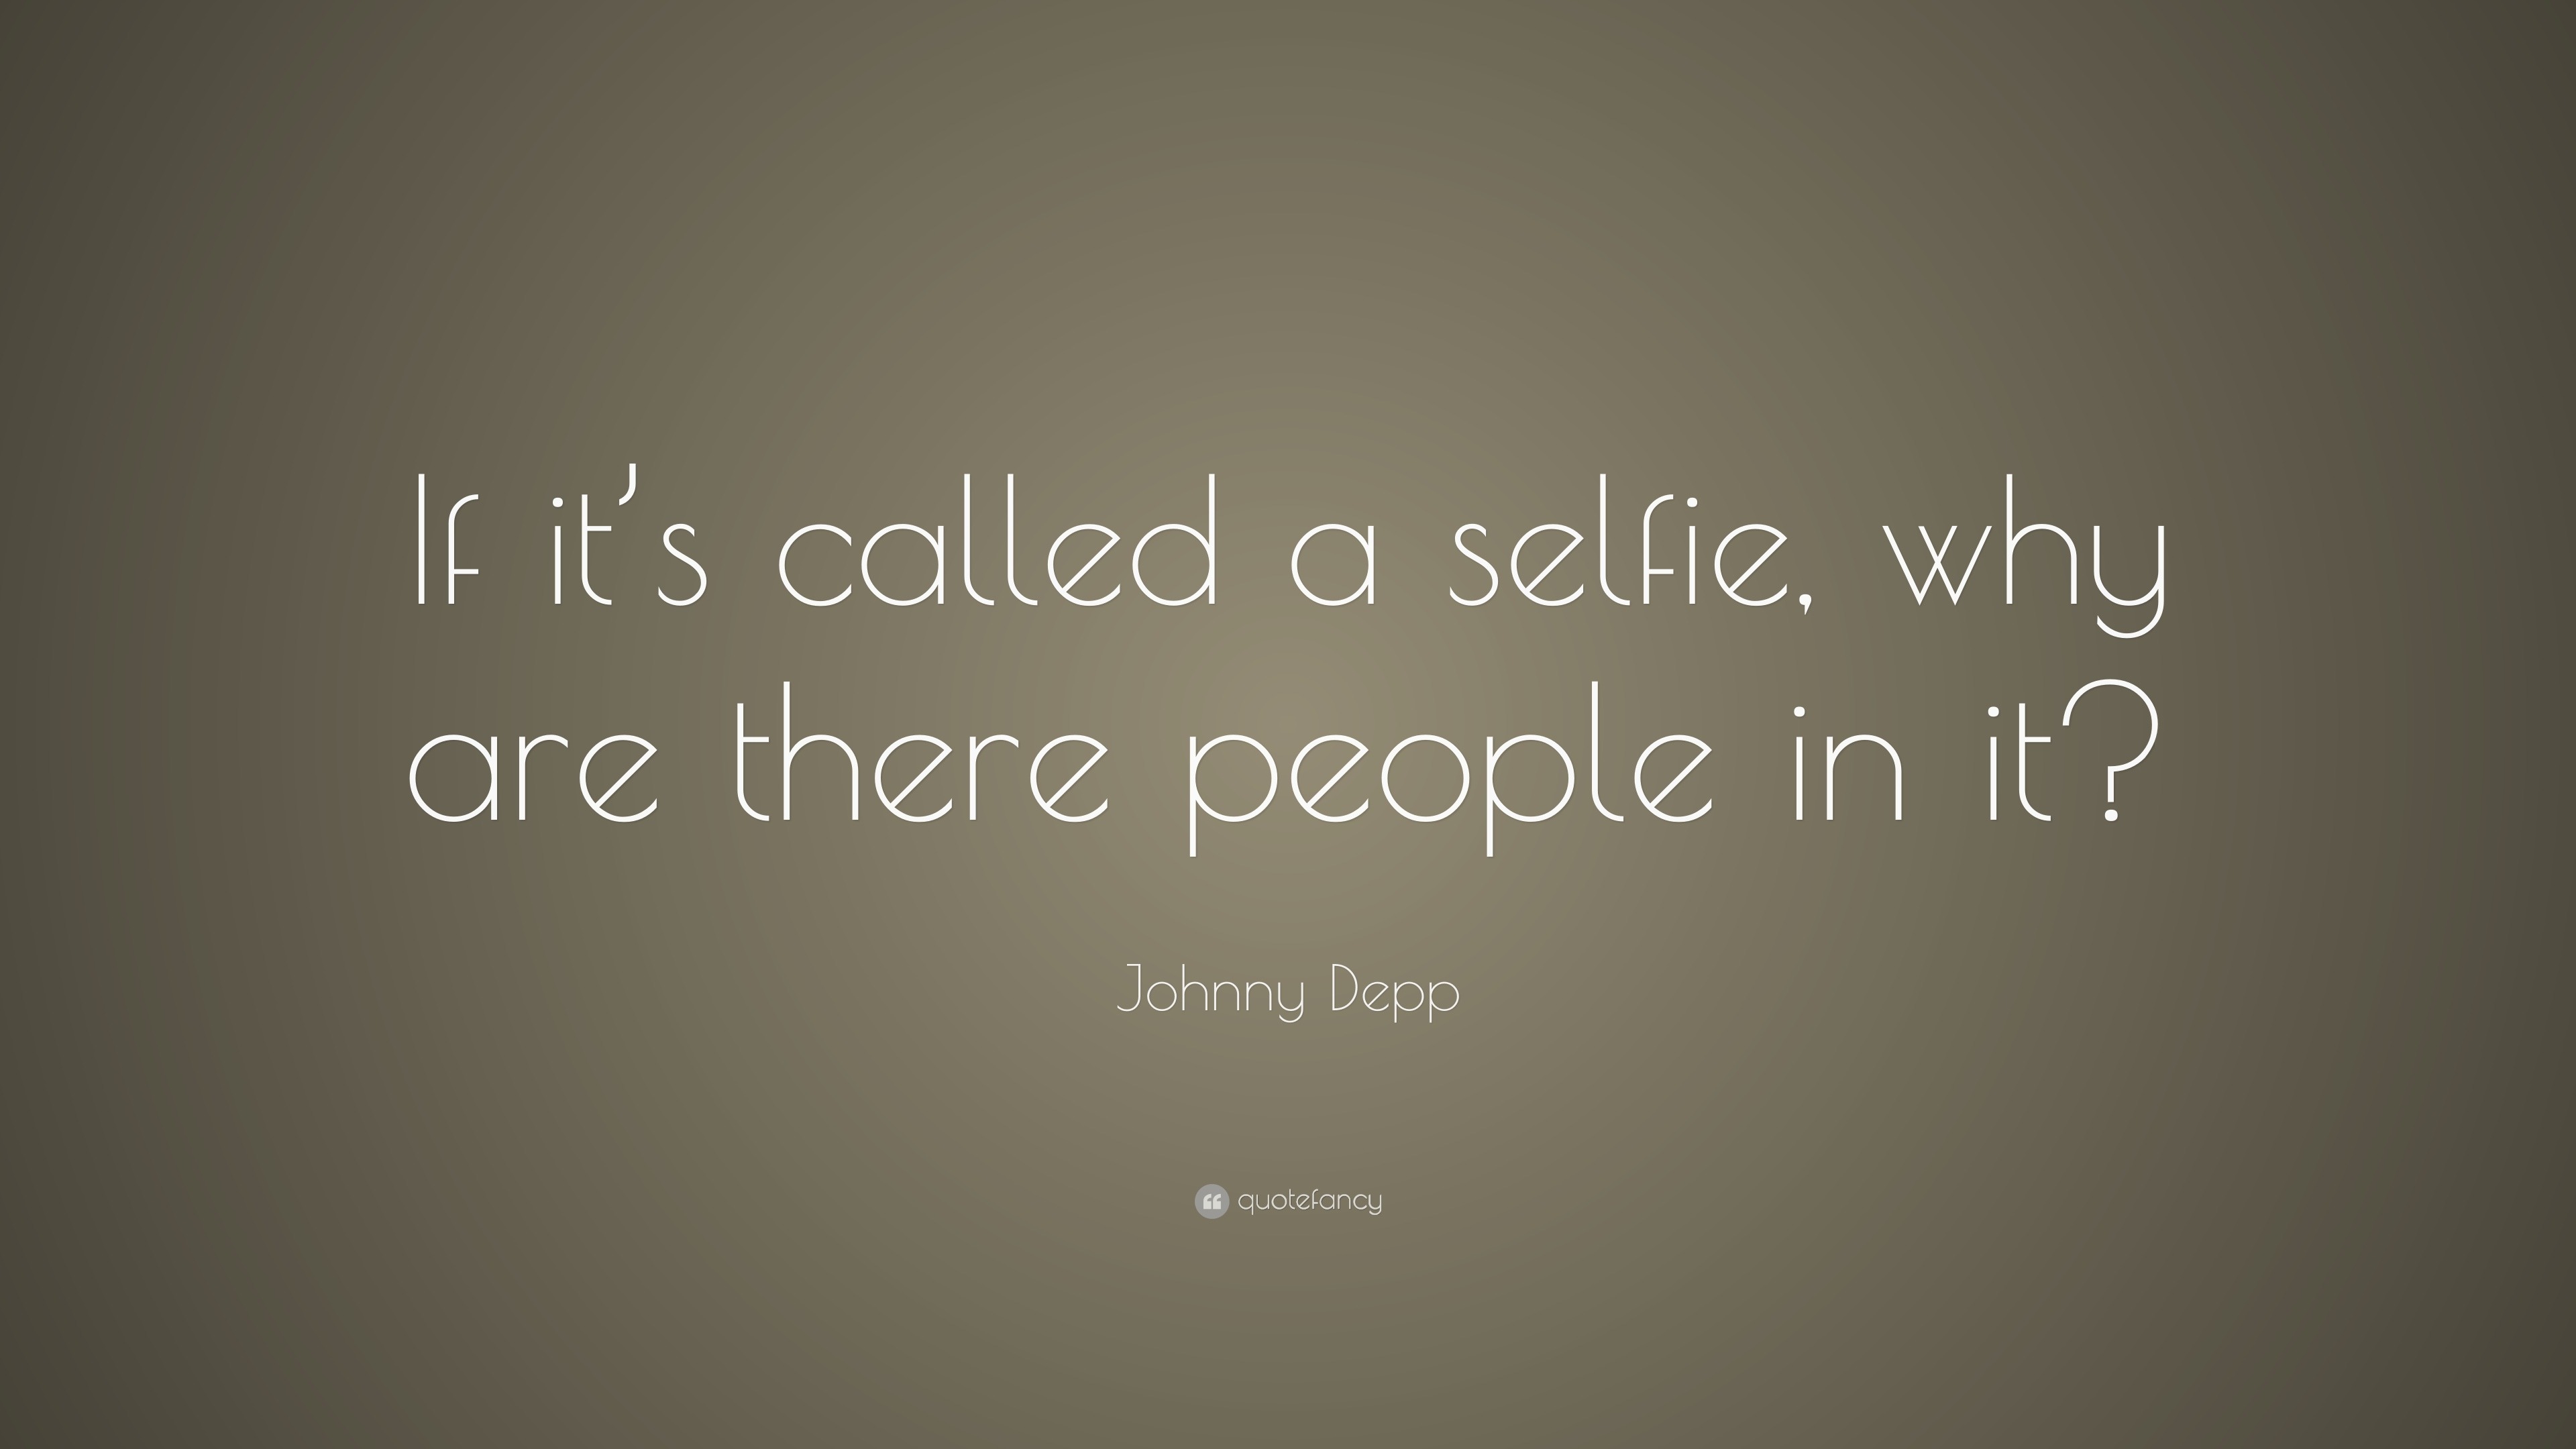 Johnny Depp Quote: “If it’s called a selfie, why are there people in it?”